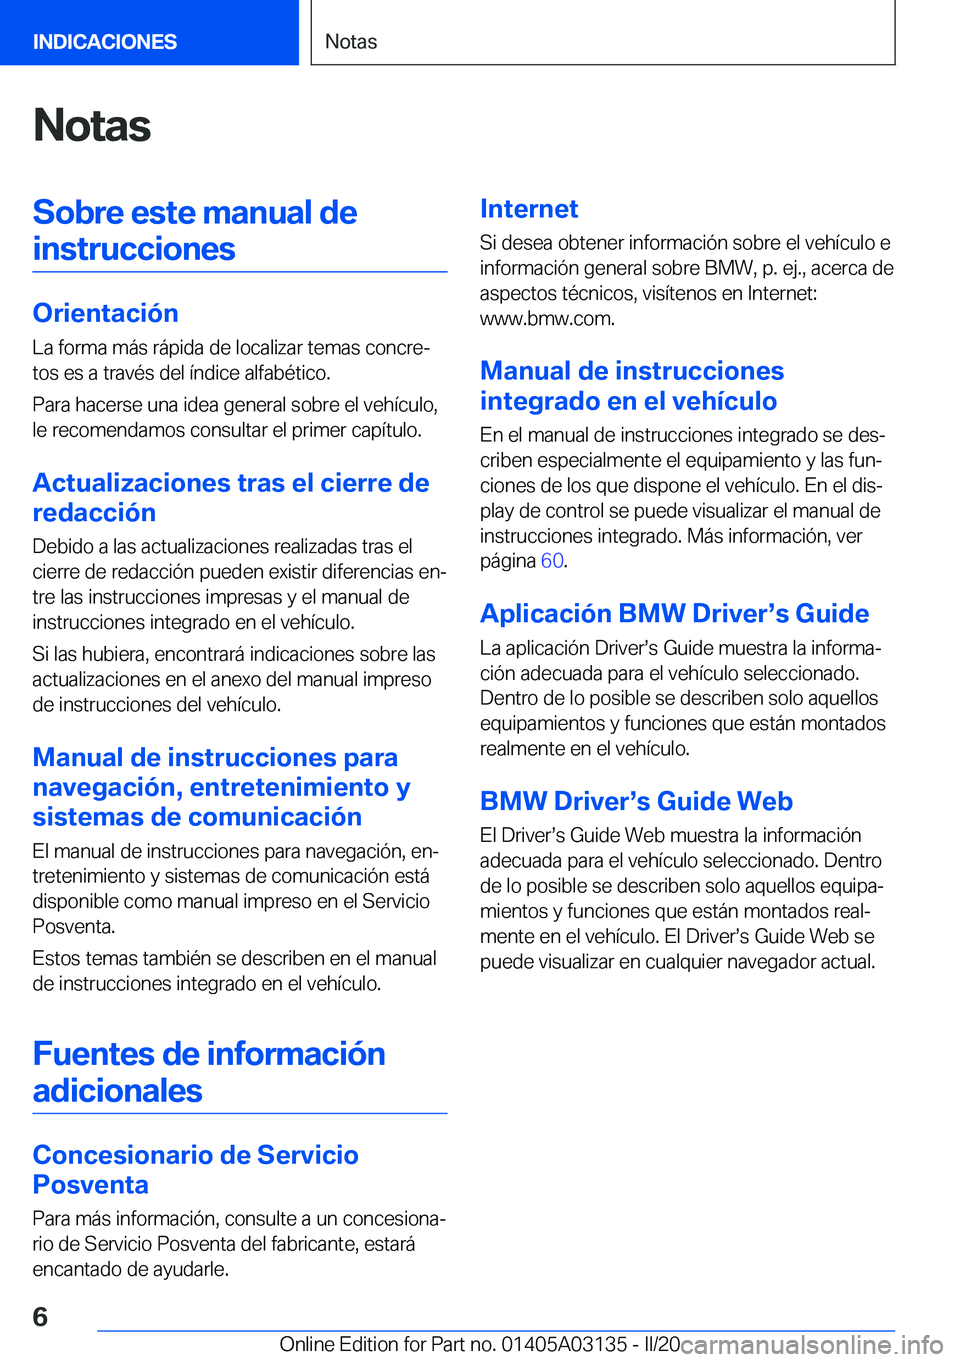 BMW M4 2020  Manuales de Empleo (in Spanish) �N�o�t�a�s�S�o�b�r�e��e�s�t�e��m�a�n�u�a�l��d�e�i�n�s�t�r�u�c�c�i�o�n�e�s
�O�r�i�e�n�t�a�c�i�